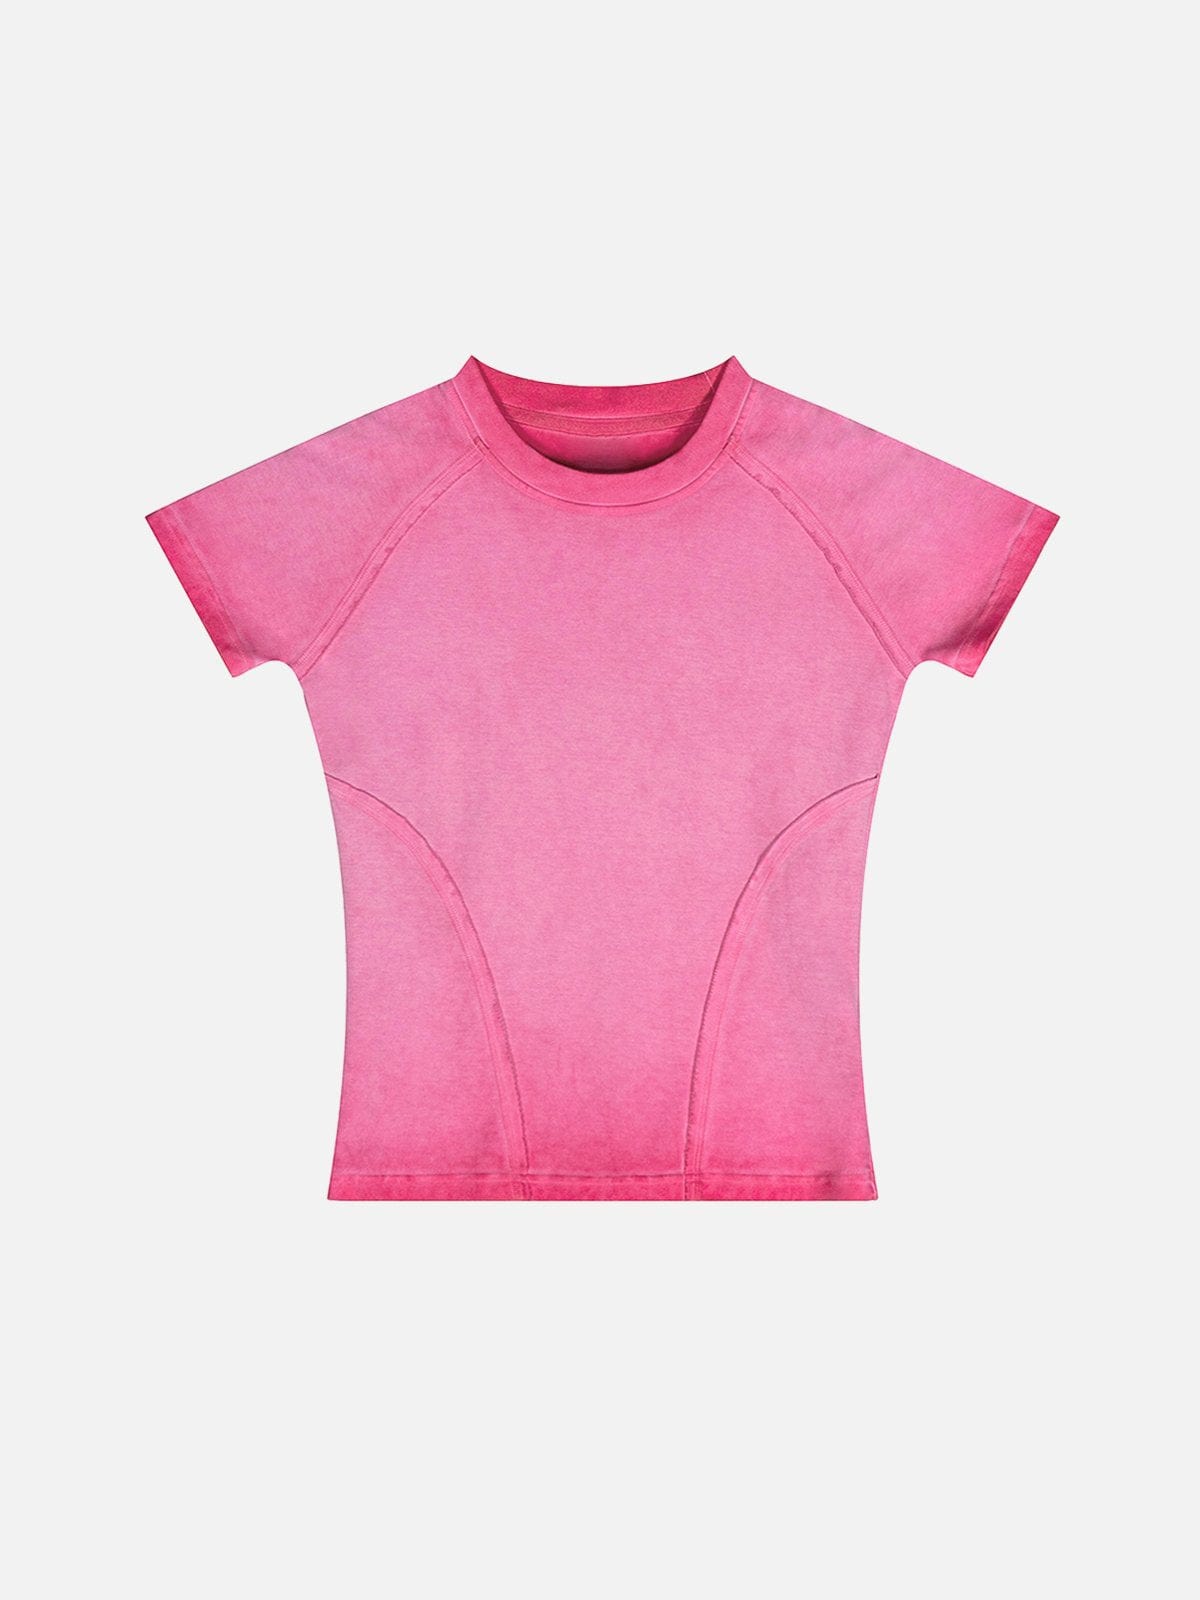 NEV Washed Gradient Short Tee